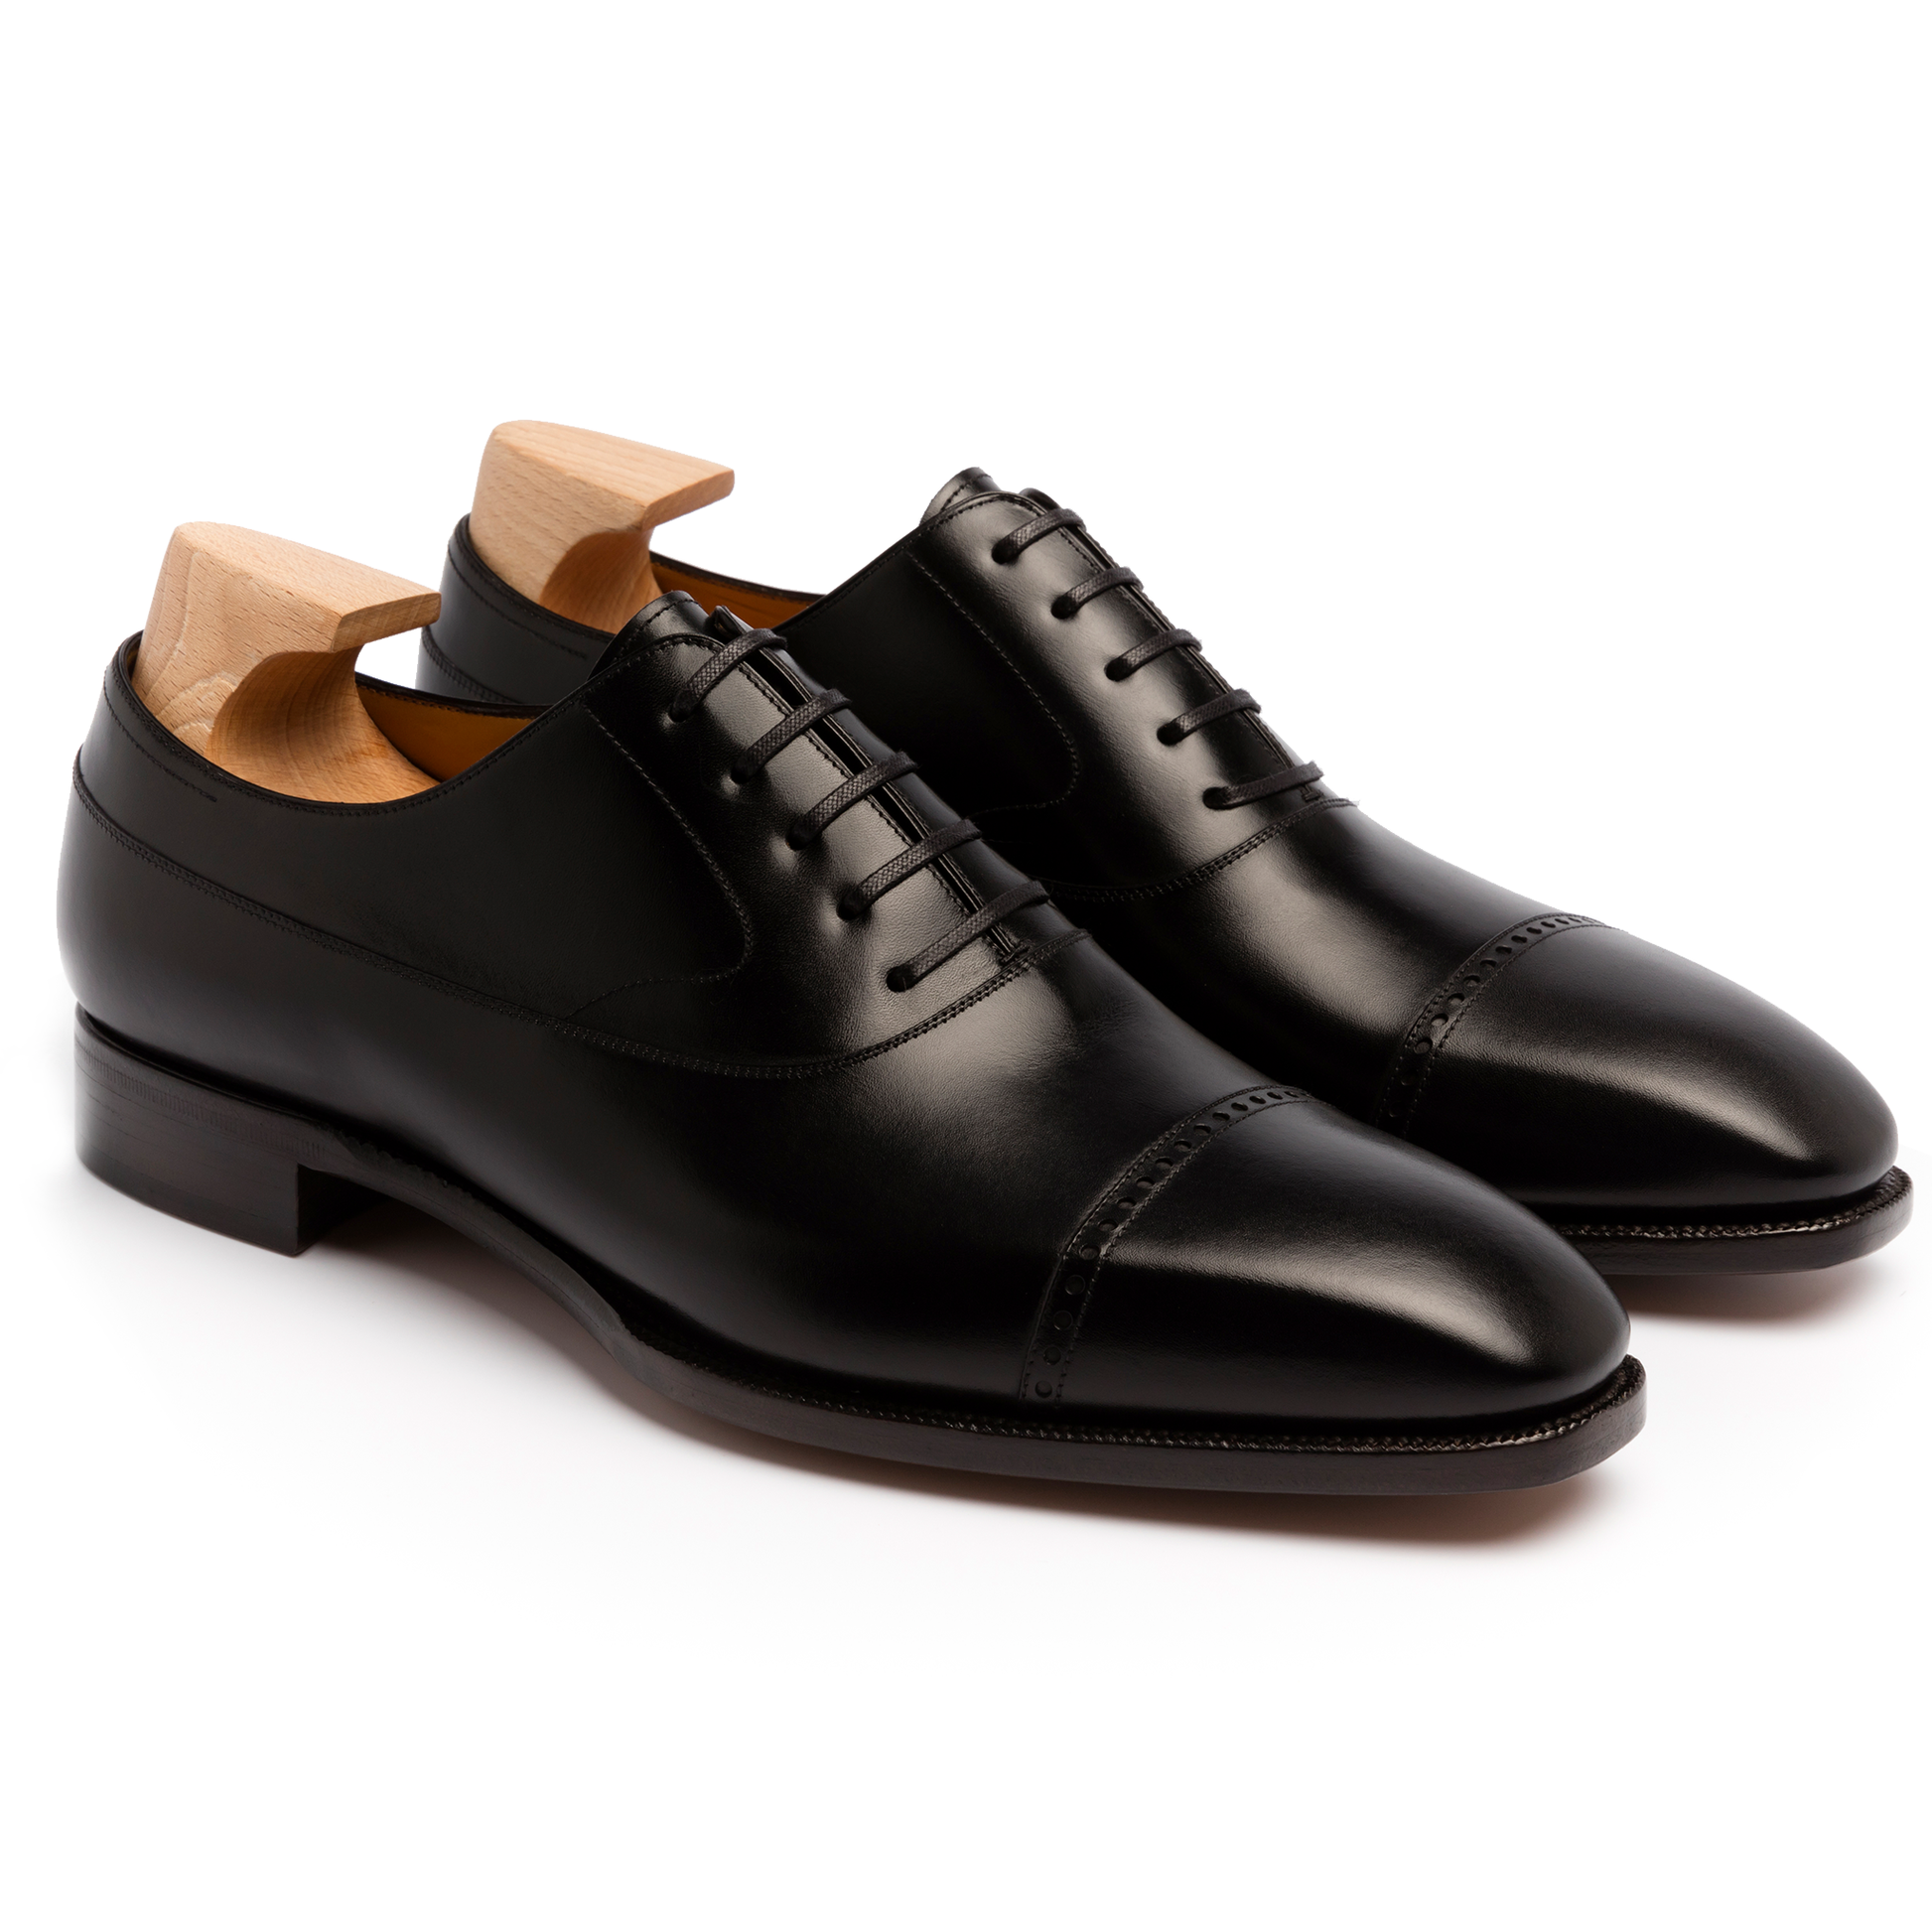 TLB Mallorca leather shoes 109 / PICASSO / BOXCALF BLACK